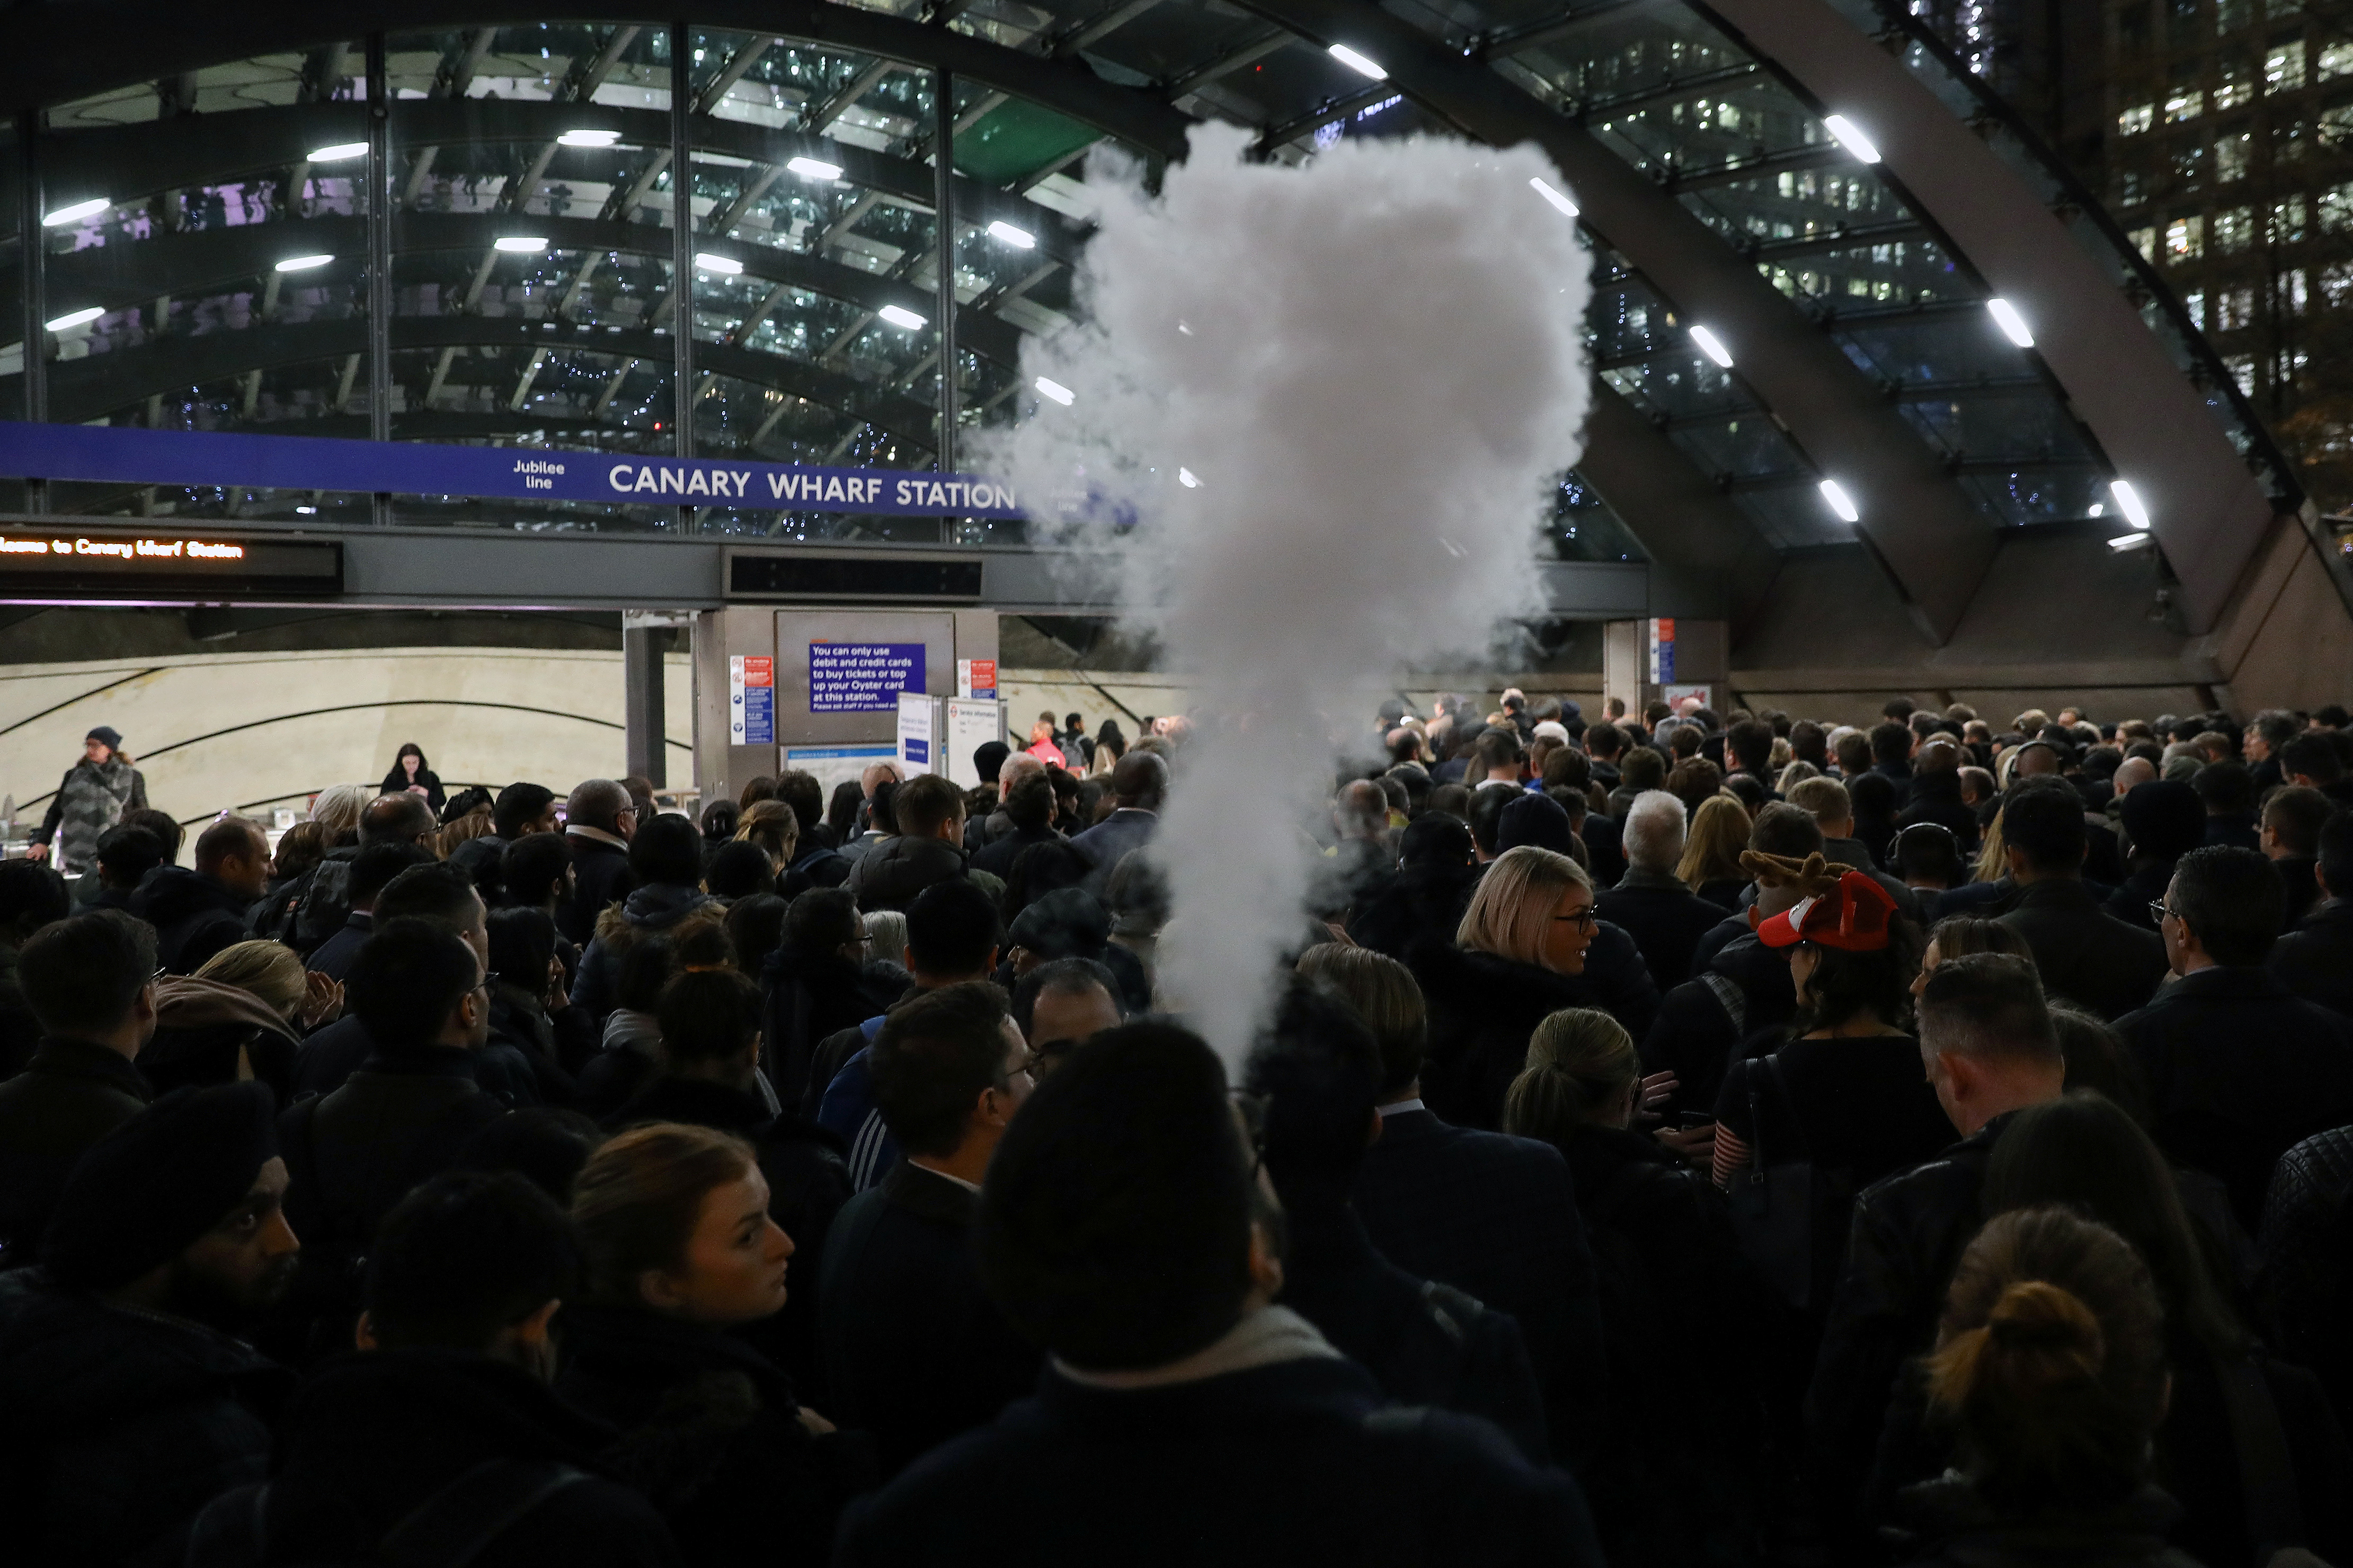 A man smokes an e-cigarette in the queue to Canary Wharf tube station